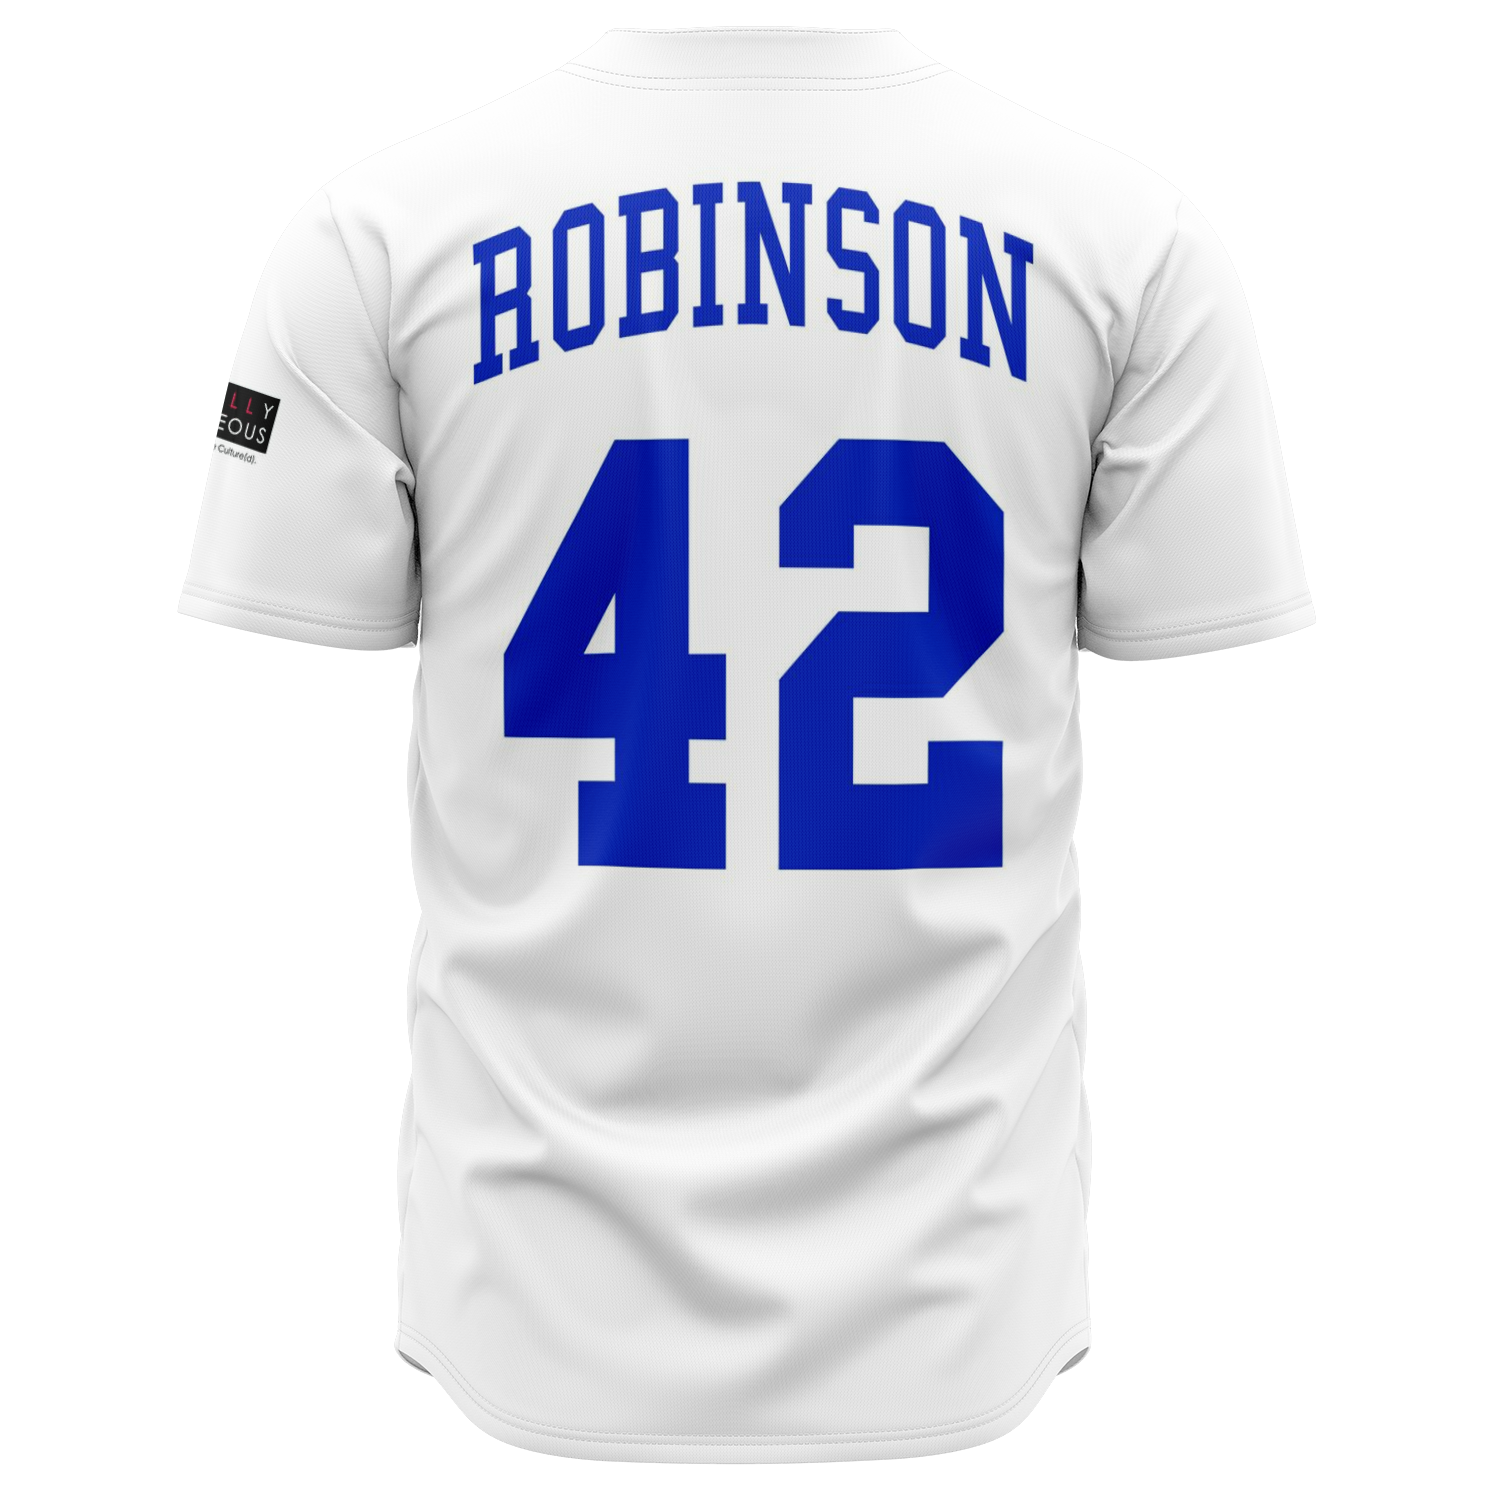 Youth Nike Jackie Robinson Light Blue Brooklyn Dodgers Alternate  Cooperstown Collection Player Jersey